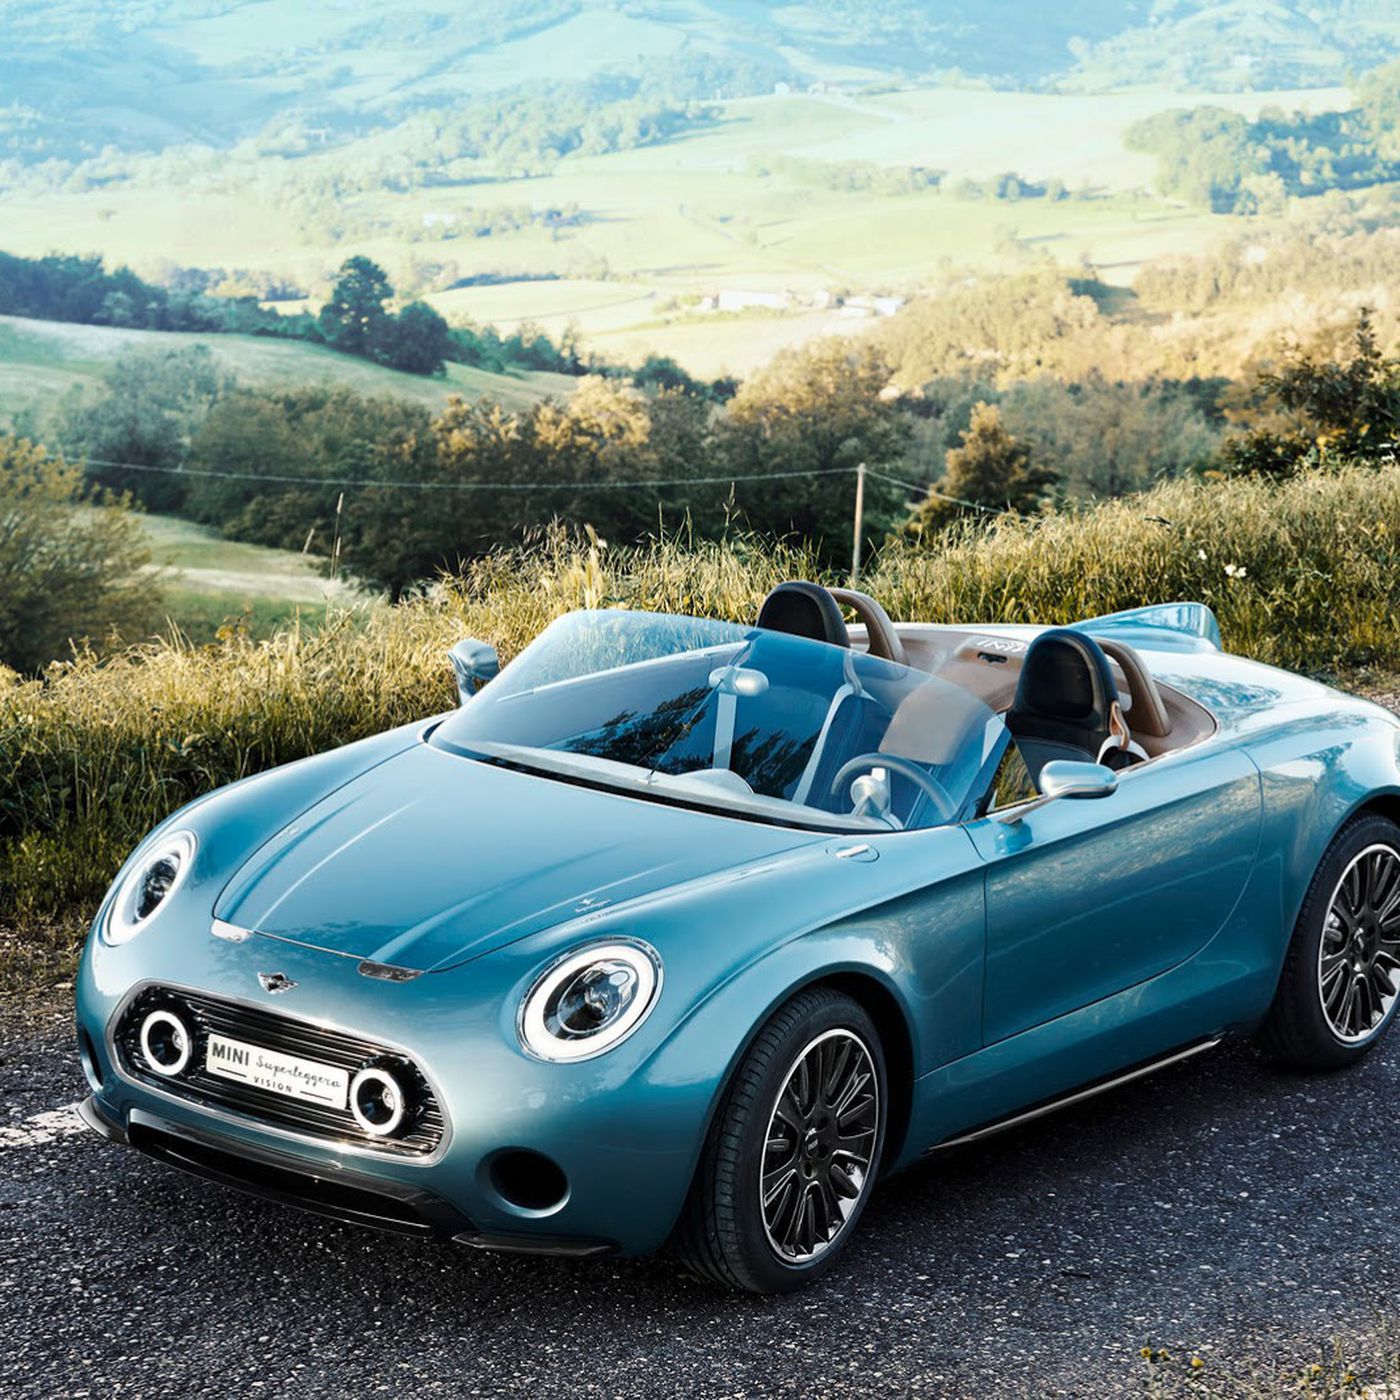 This handmade Italian roadster is a Mini Cooper unlike any other - The Verge